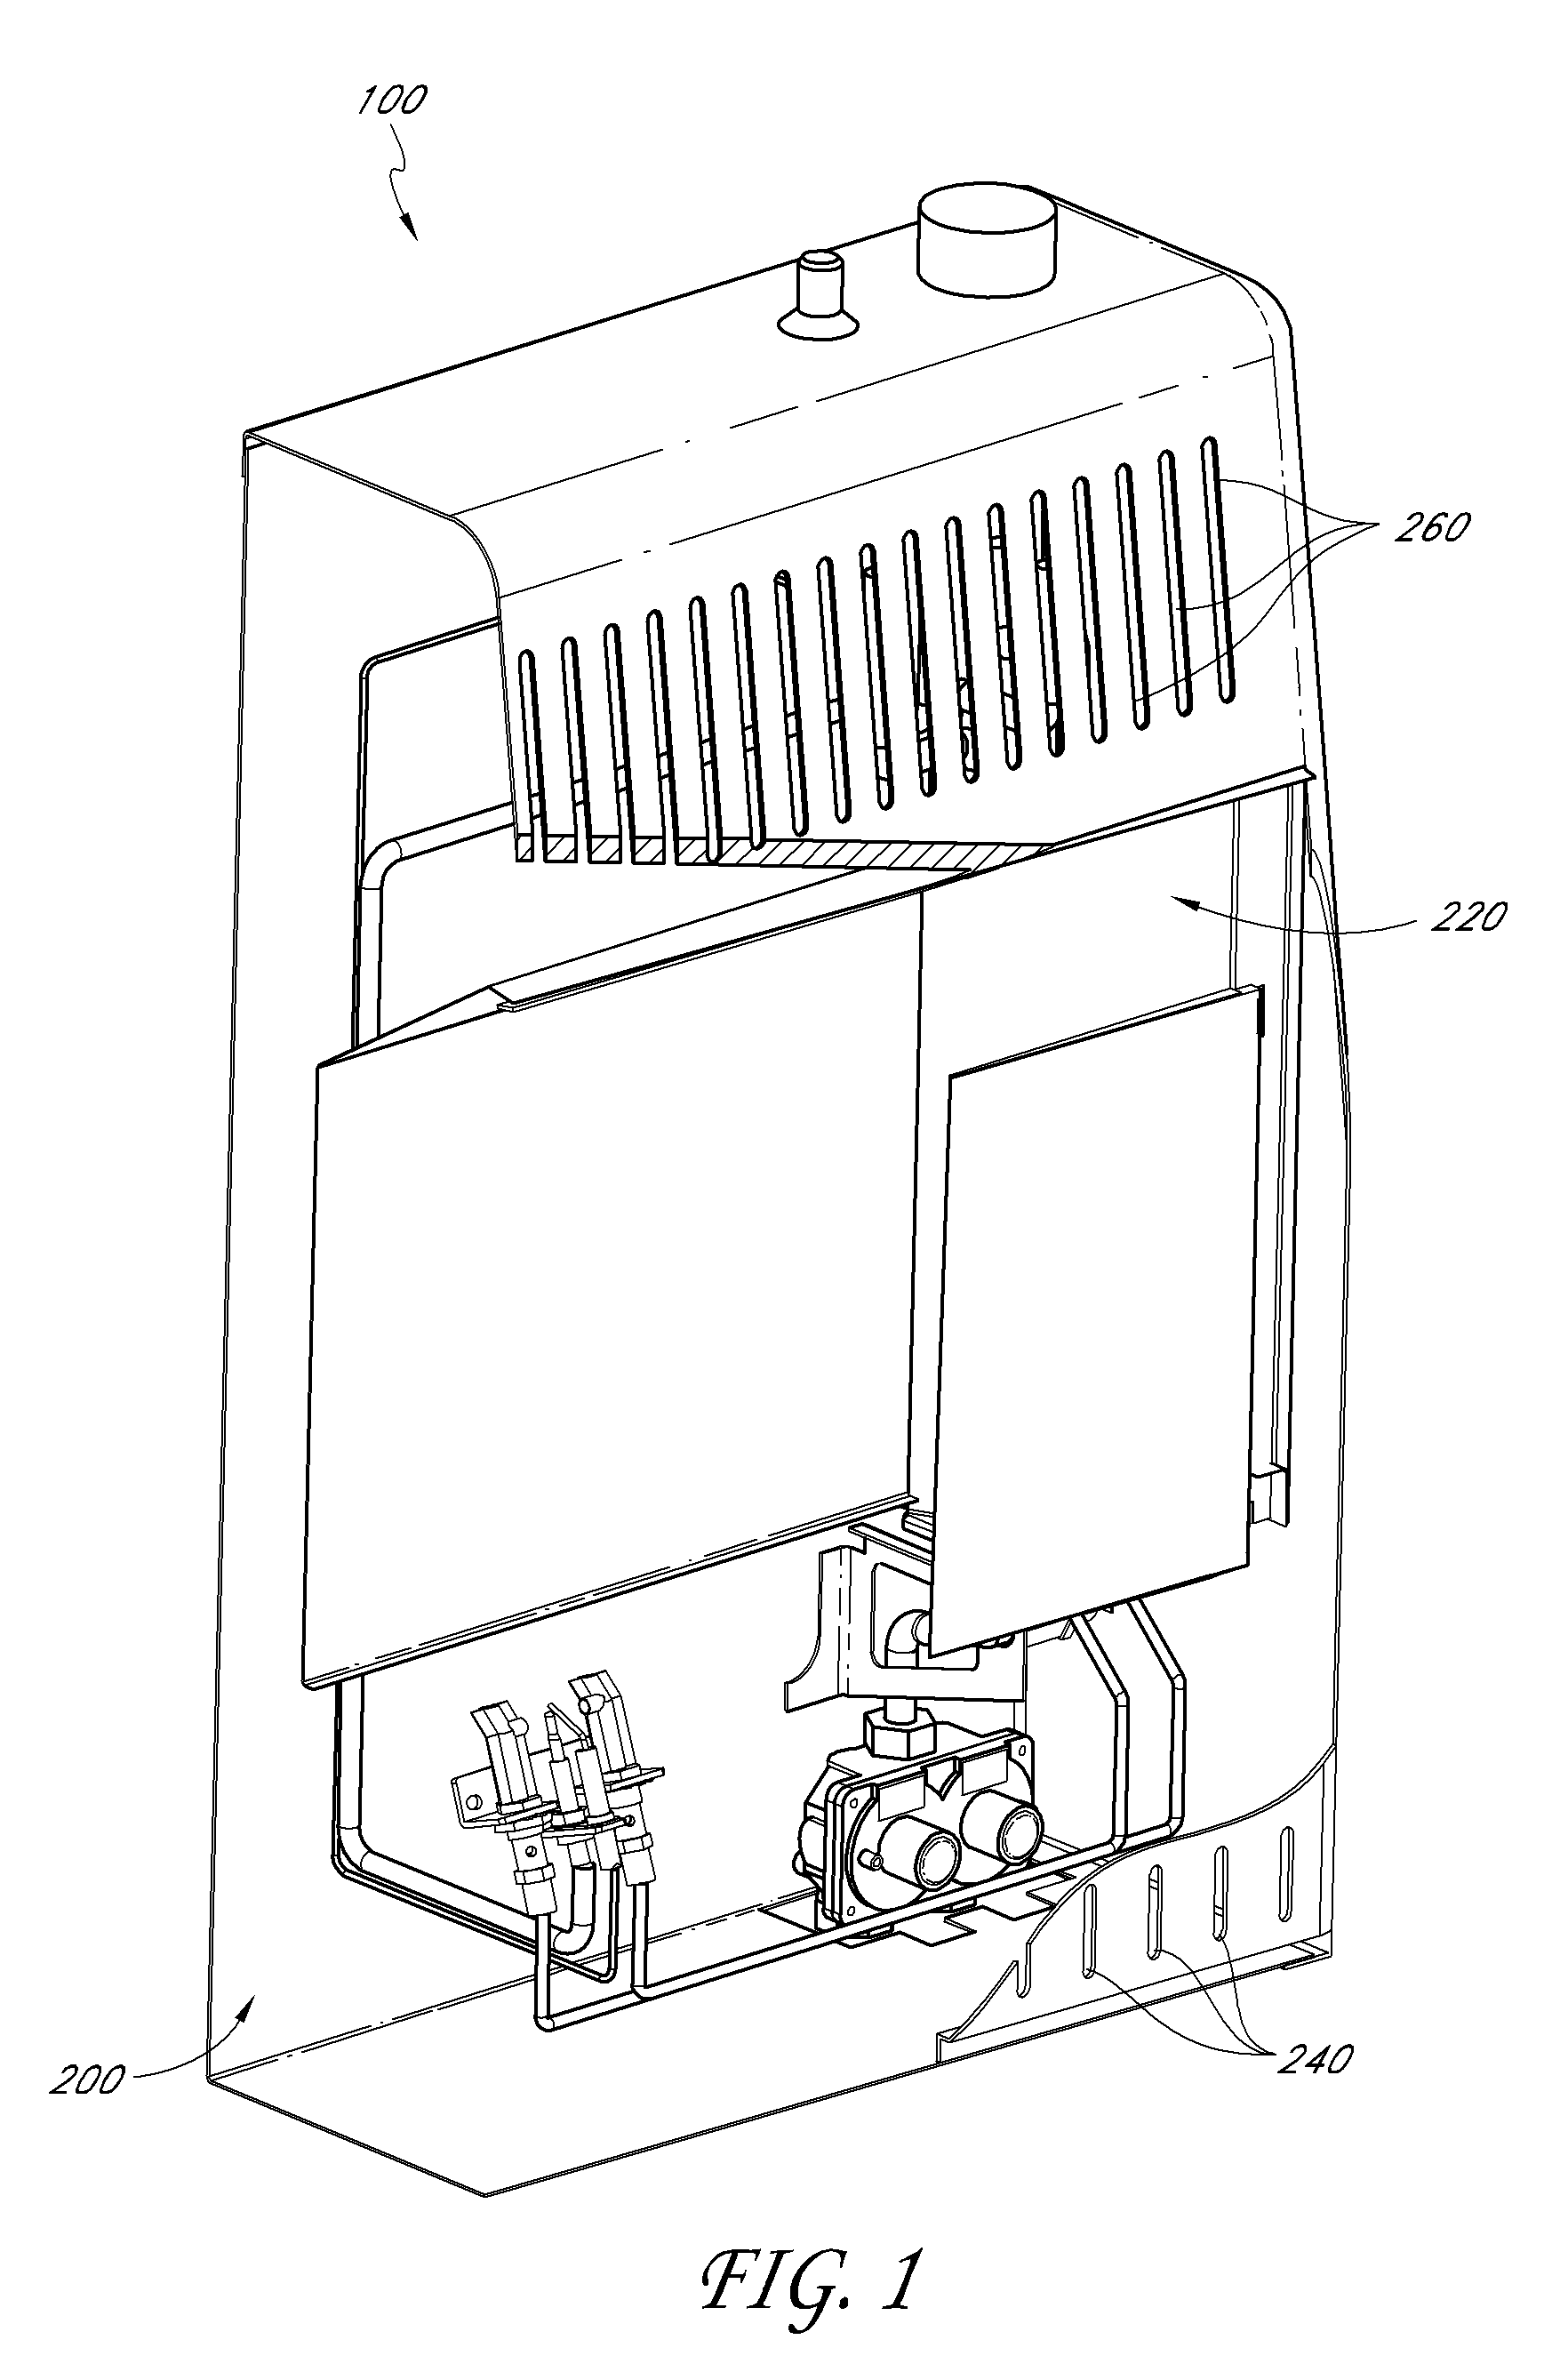 Dual fuel heating system and air shutter